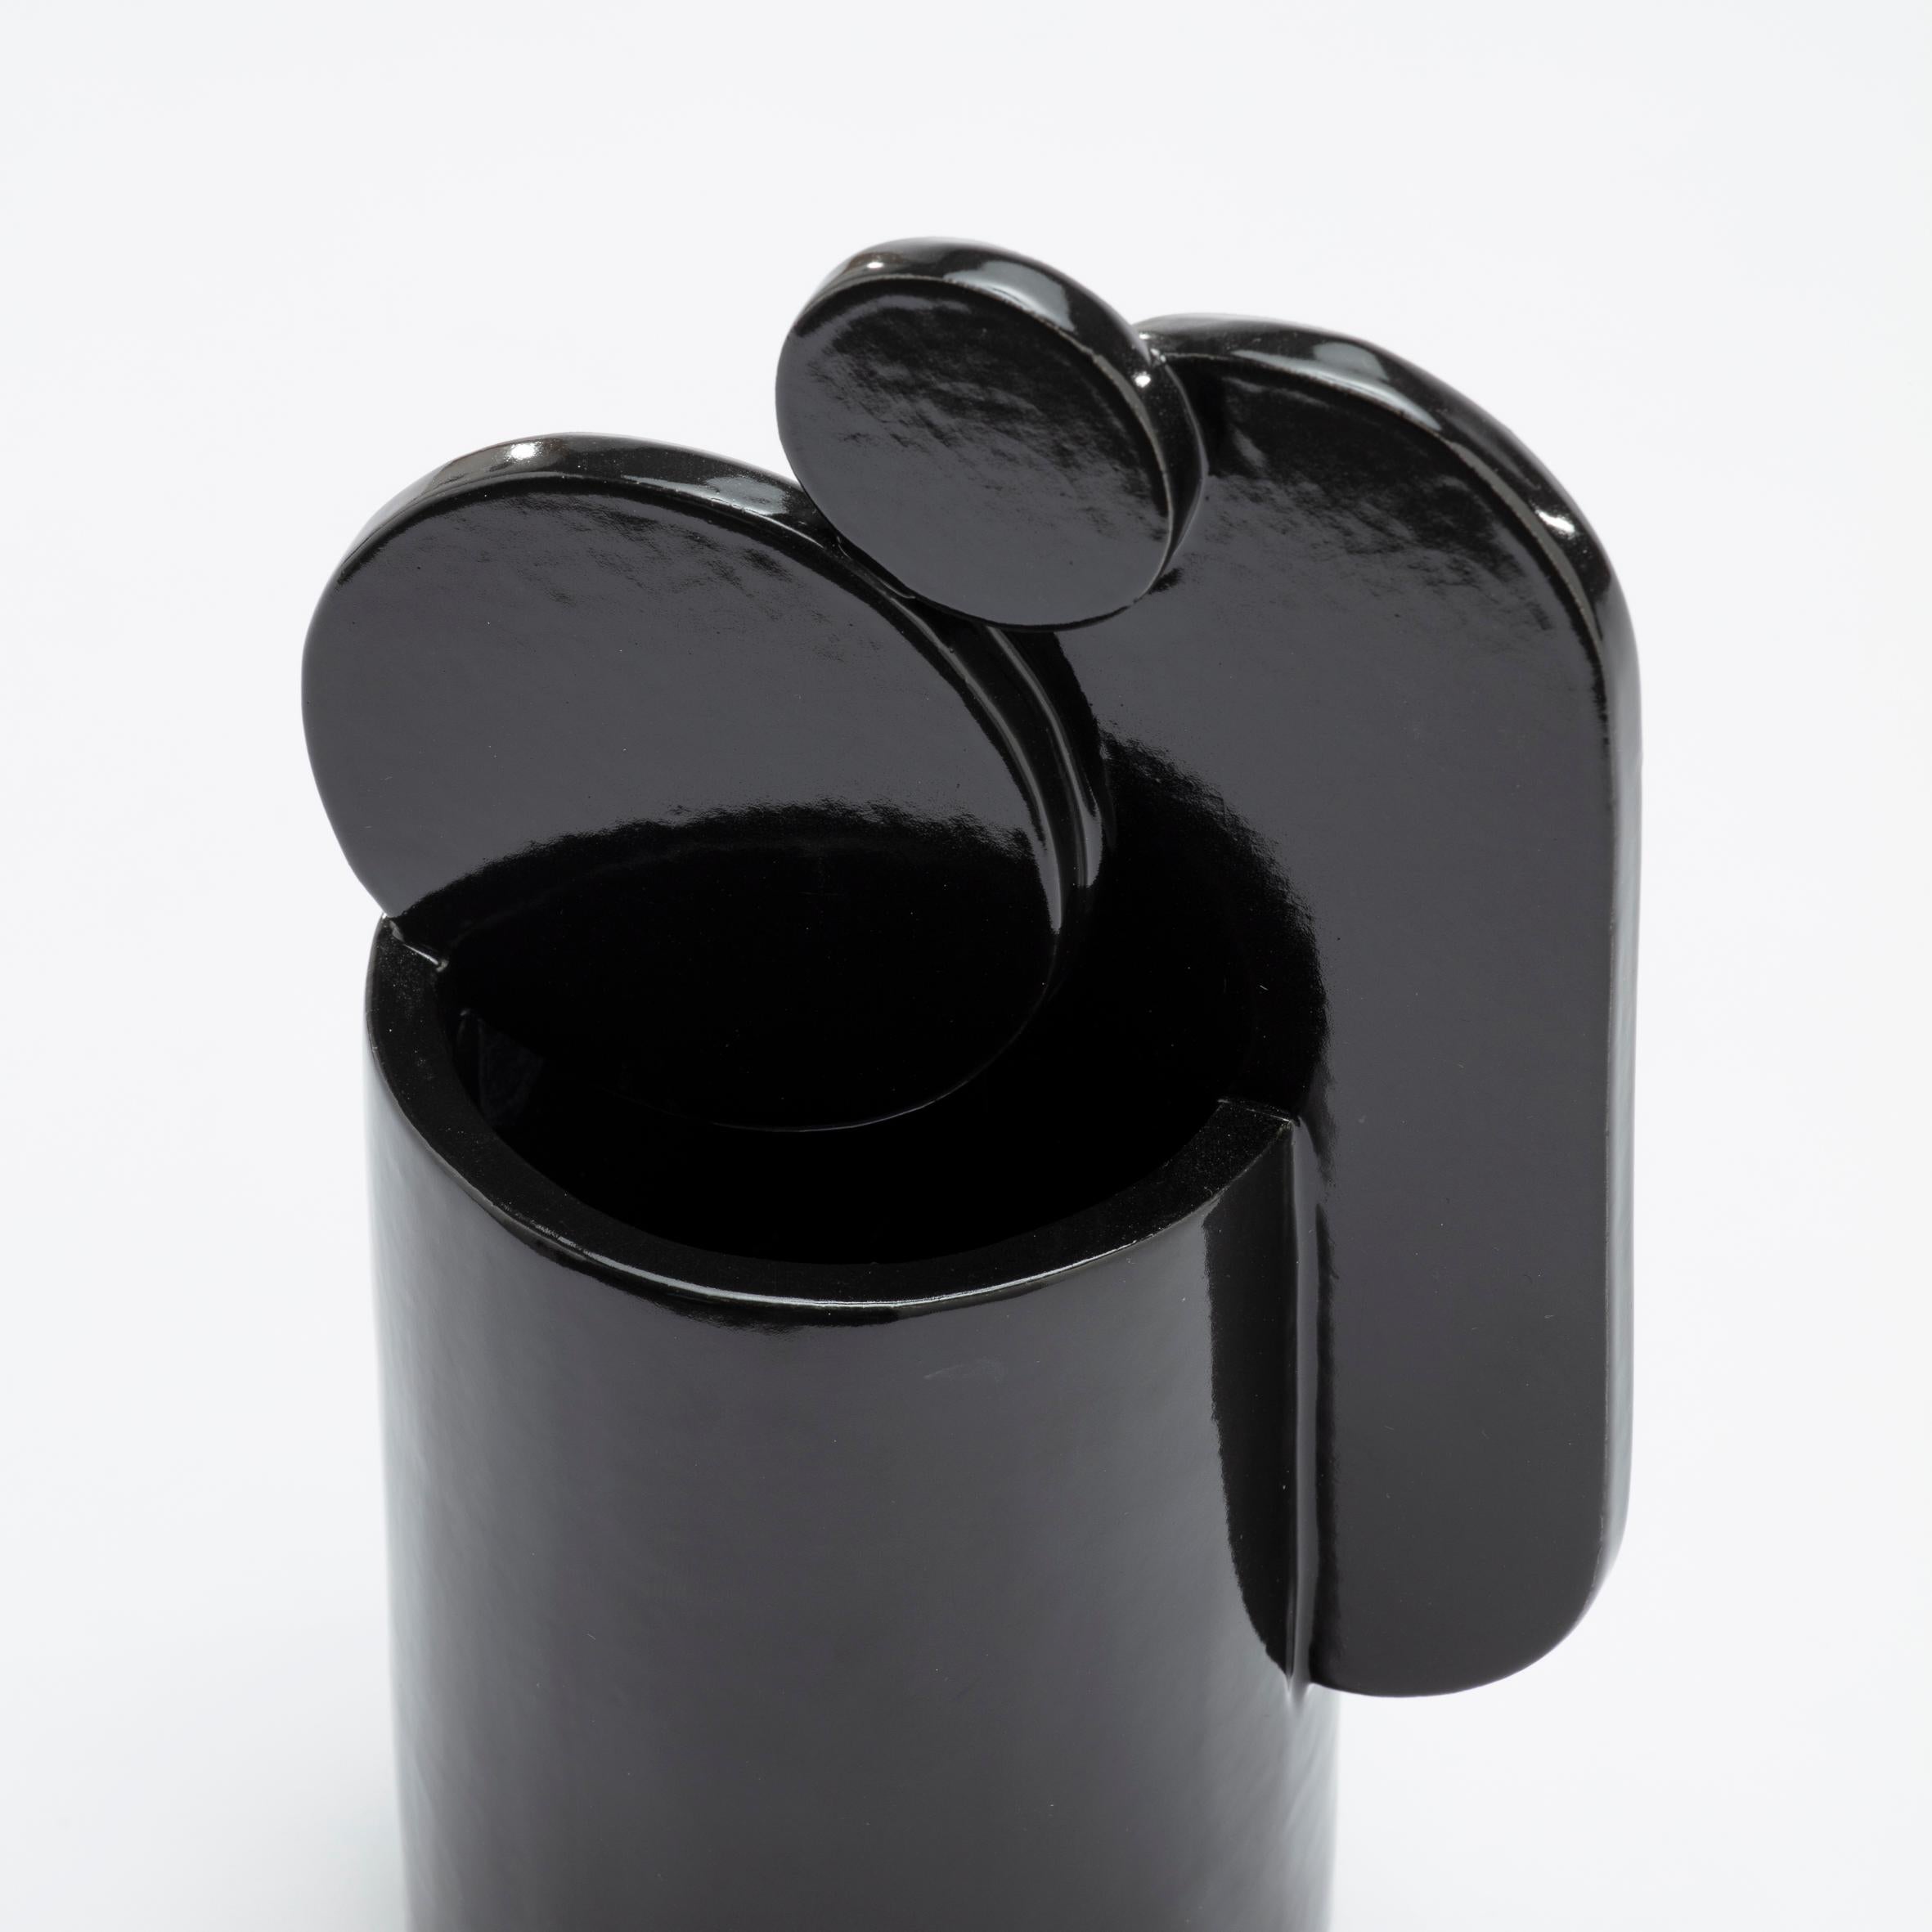 The Black Sardinia Vase is the version in a beautiful shiny black enamel of the Sardina Vase, in turquoise, from the Bubble Family Collection. Entirely handmade using the lathe and slab technique the vase is not suitable for holding liquids. It has